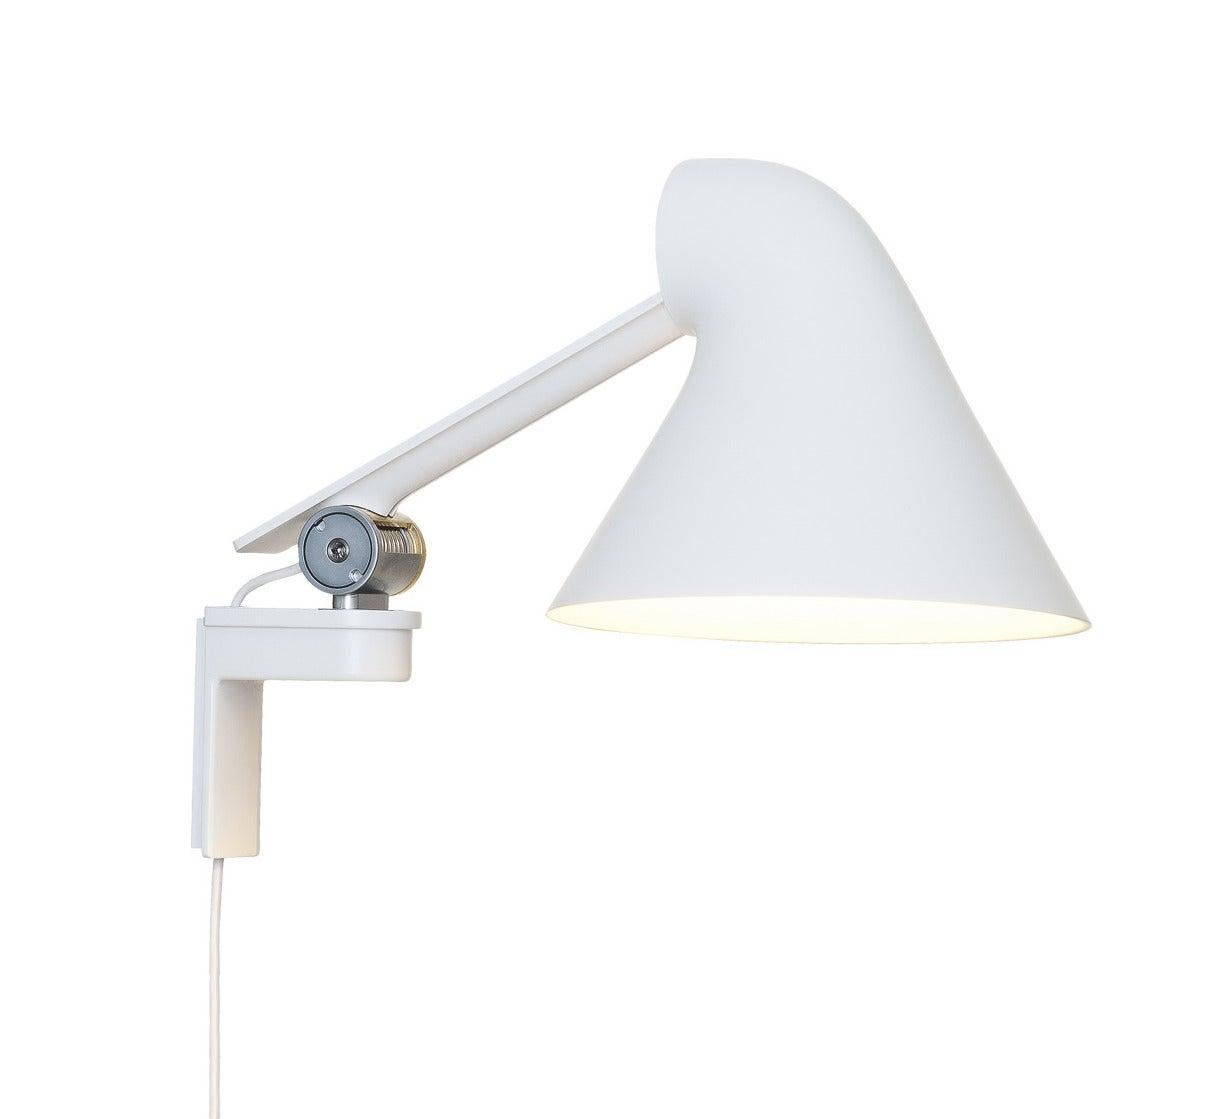 Louis Poulsen NJP Wall Short Lamp in White by Nendo, Oki Sato In New Condition For Sale In New York, NY